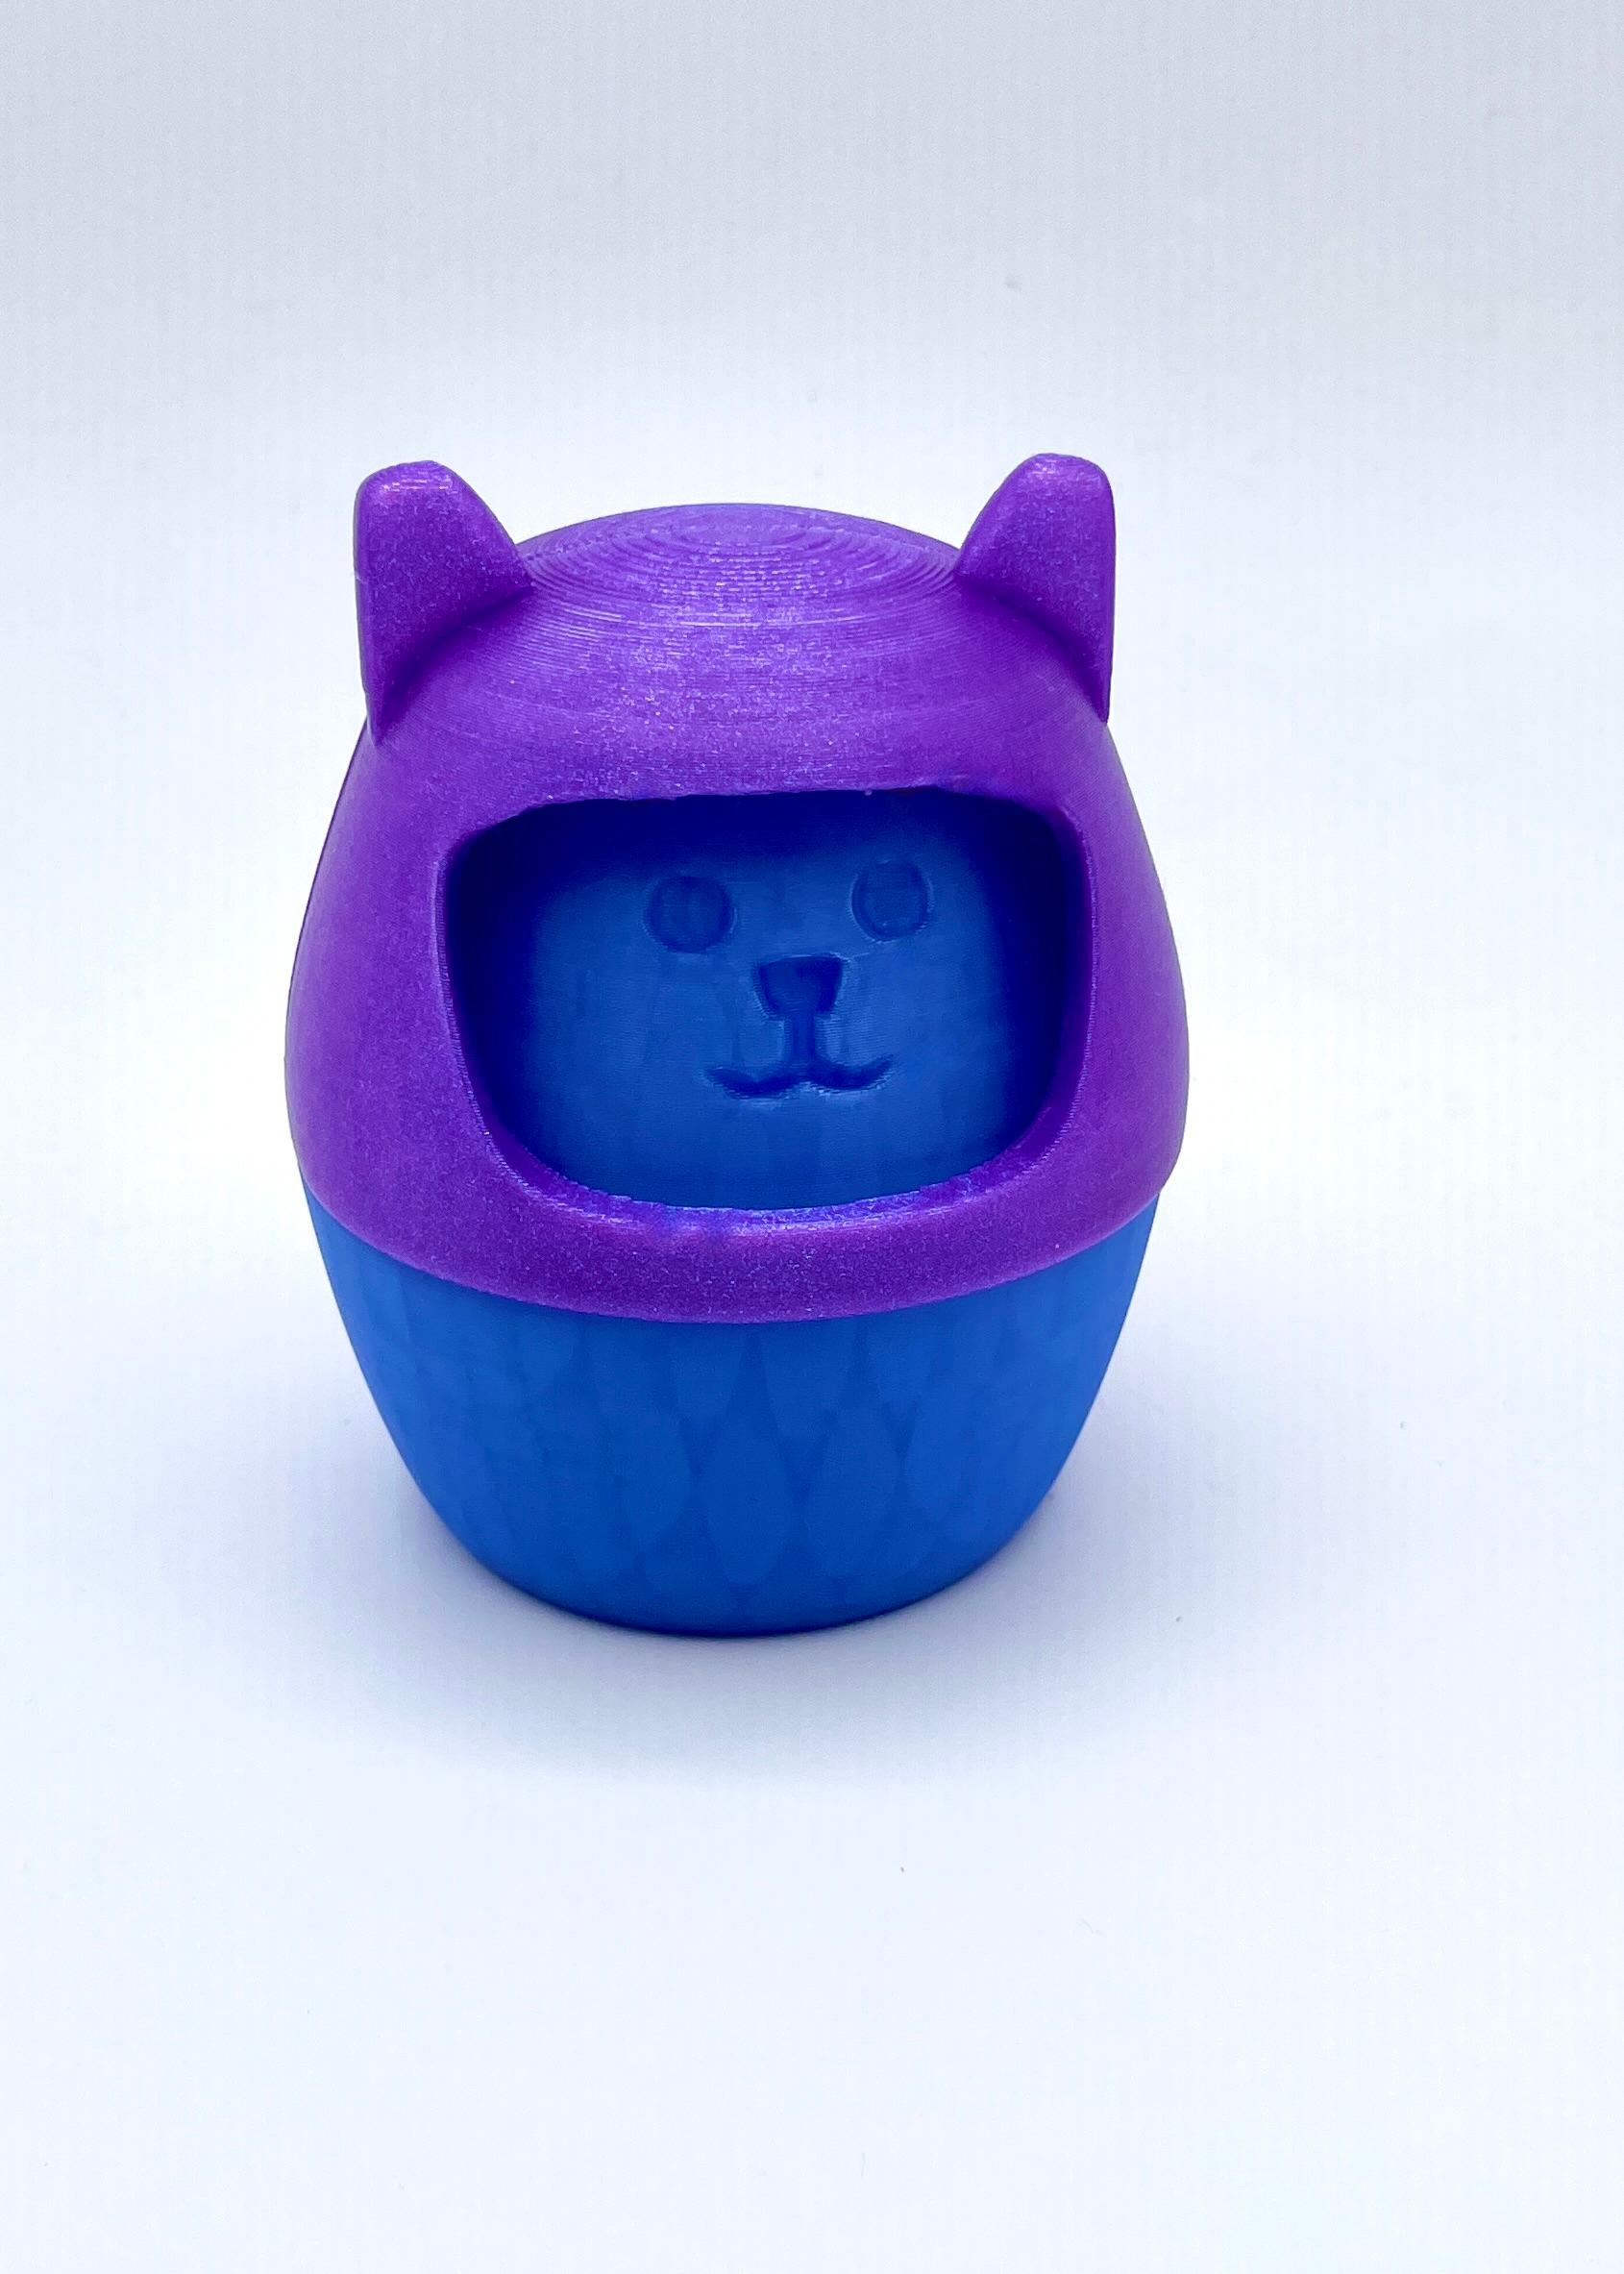 Shiba/Cat Style Twist Container - Atomic Cosmic Ray Blue and West3D Ambrosia Dolos Prince of Purple - 3d model